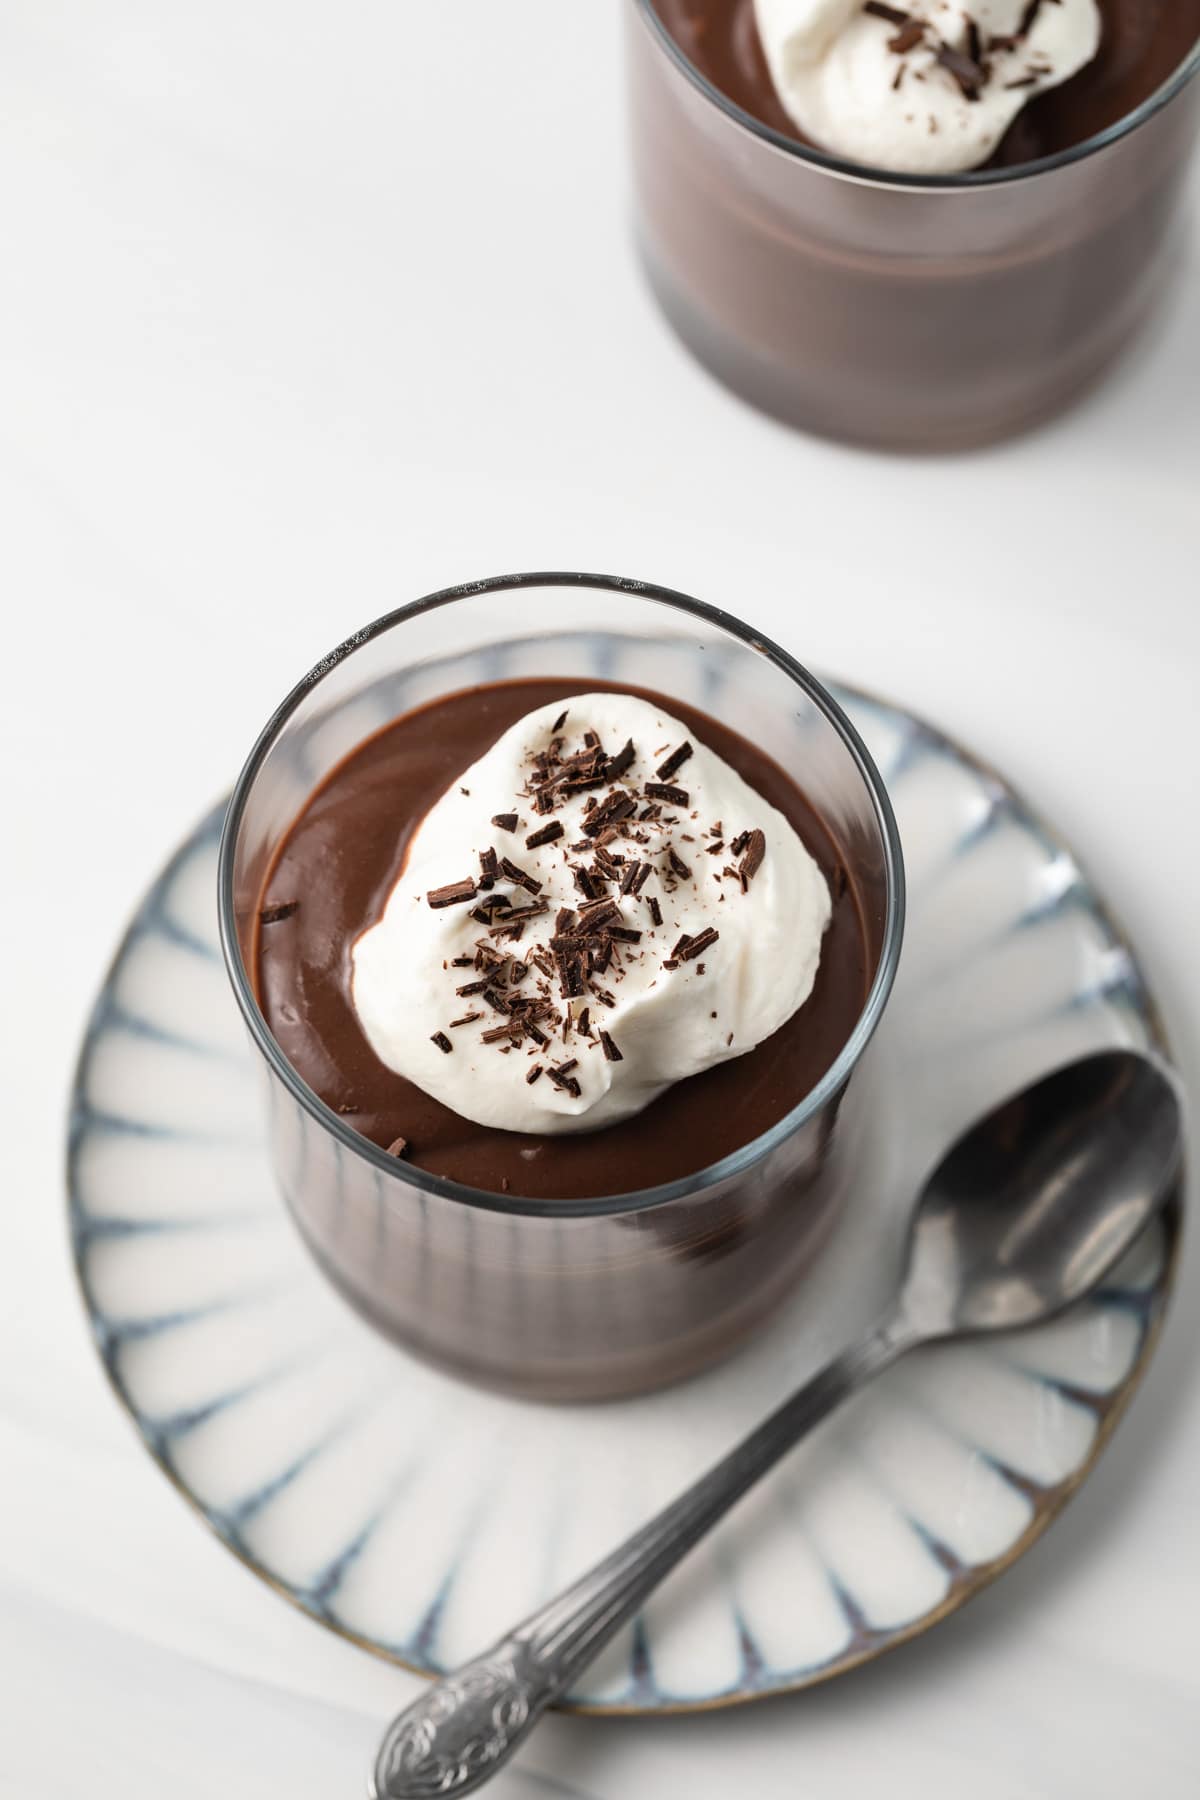 Chocolate pudding in a glass cup topped with whipped cream.